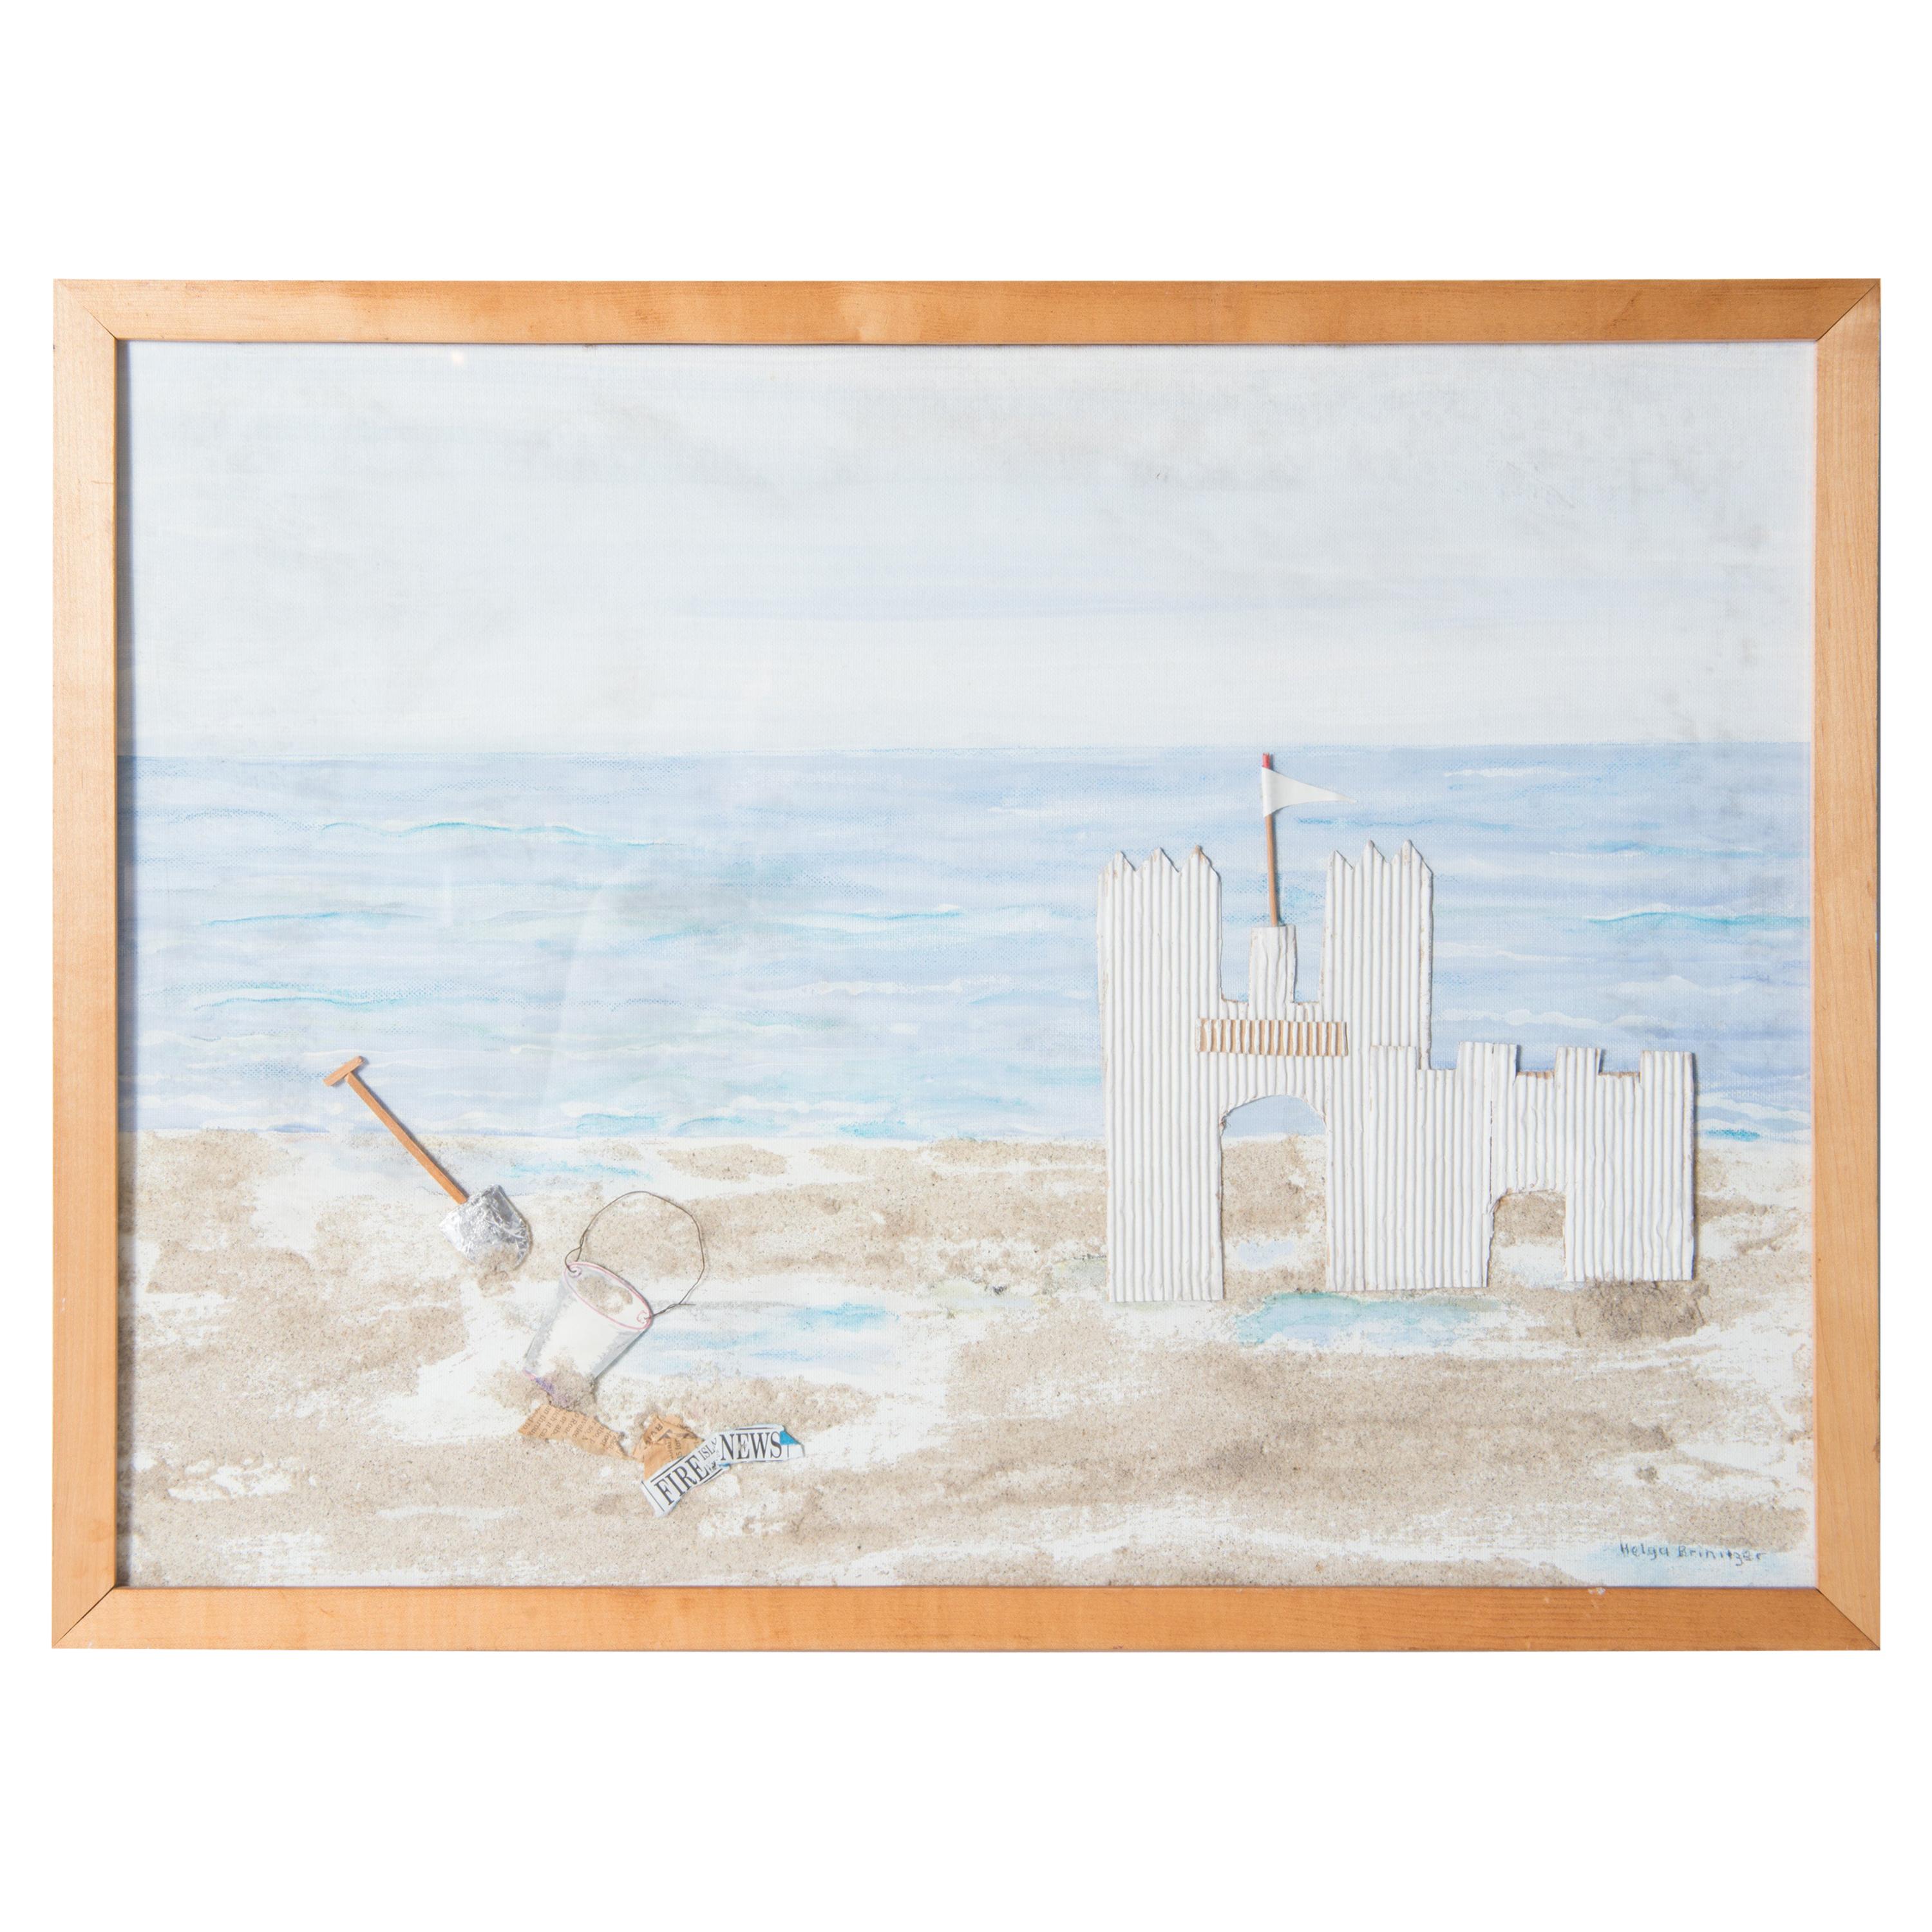 Fire Island, Sand Castle on the Beach Collage, Signed For Sale